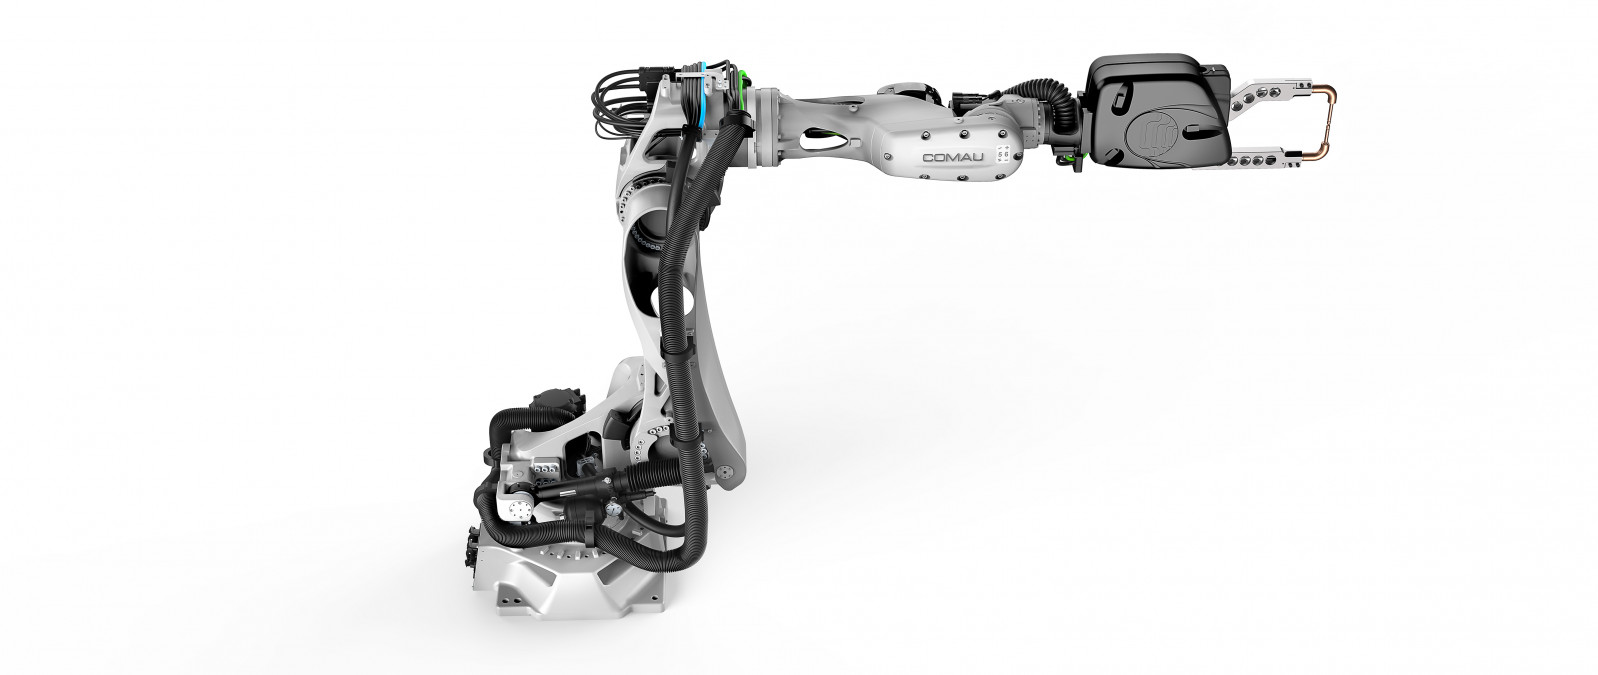 Comau introduces its N-220-2.7 new generation robot to unlock higher performance and cost-effective automation